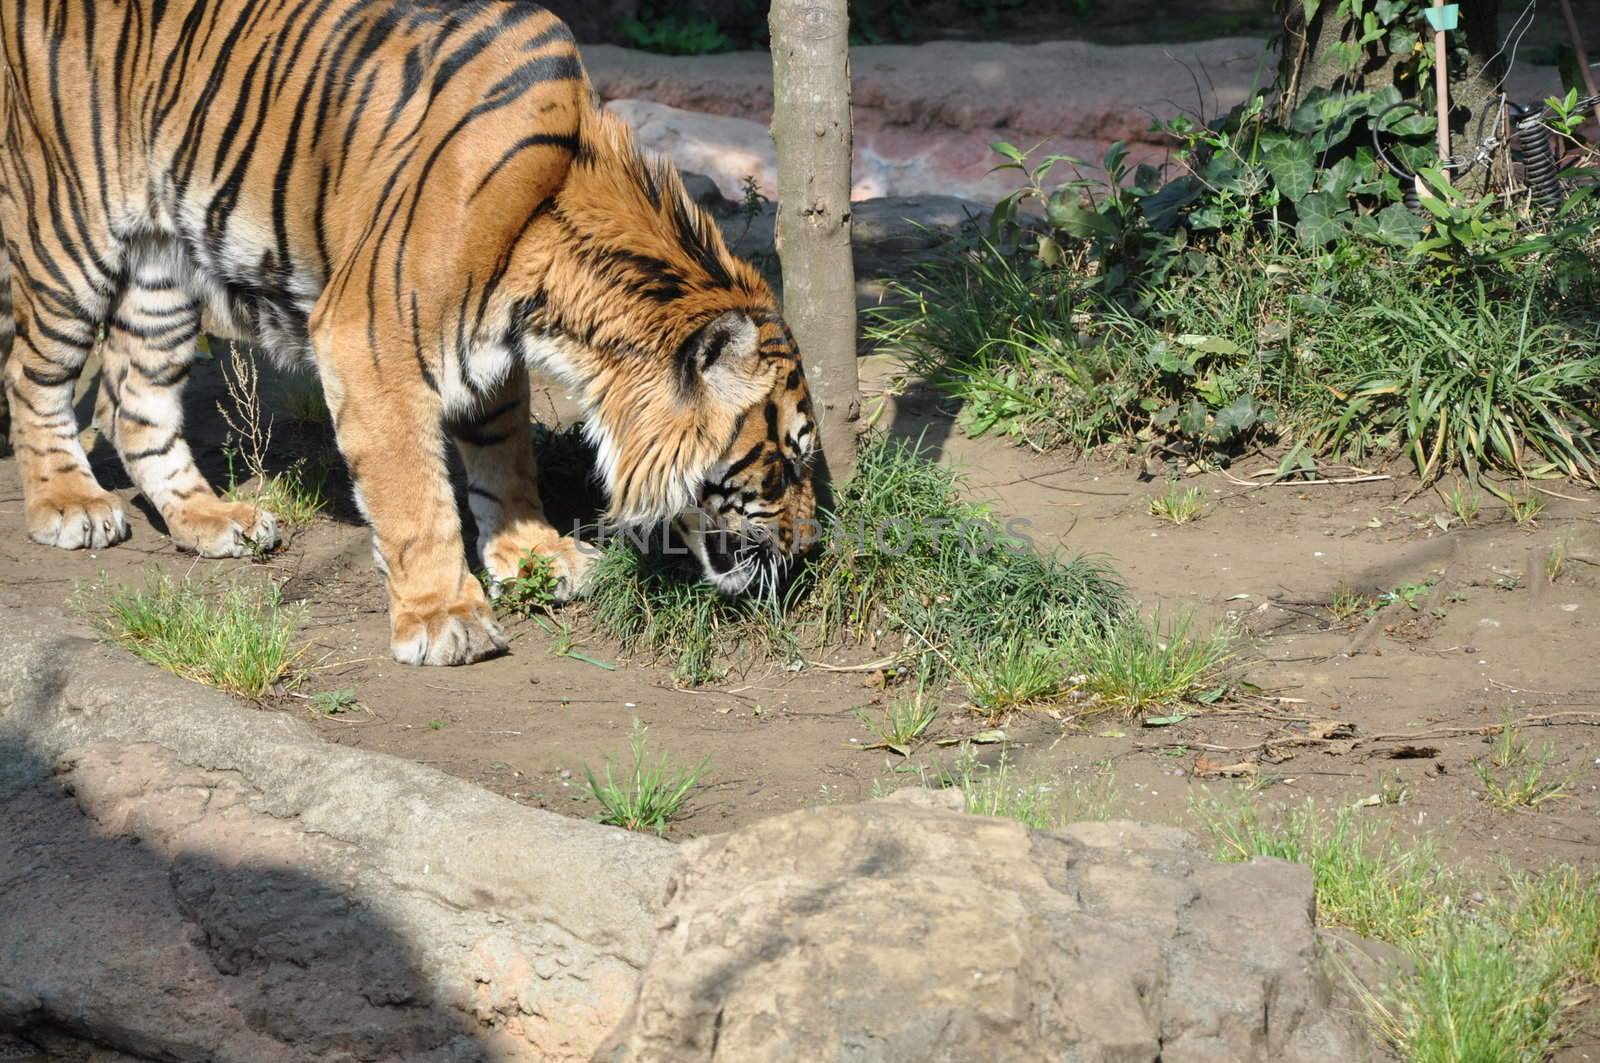 Tiger in Ueno Zoo